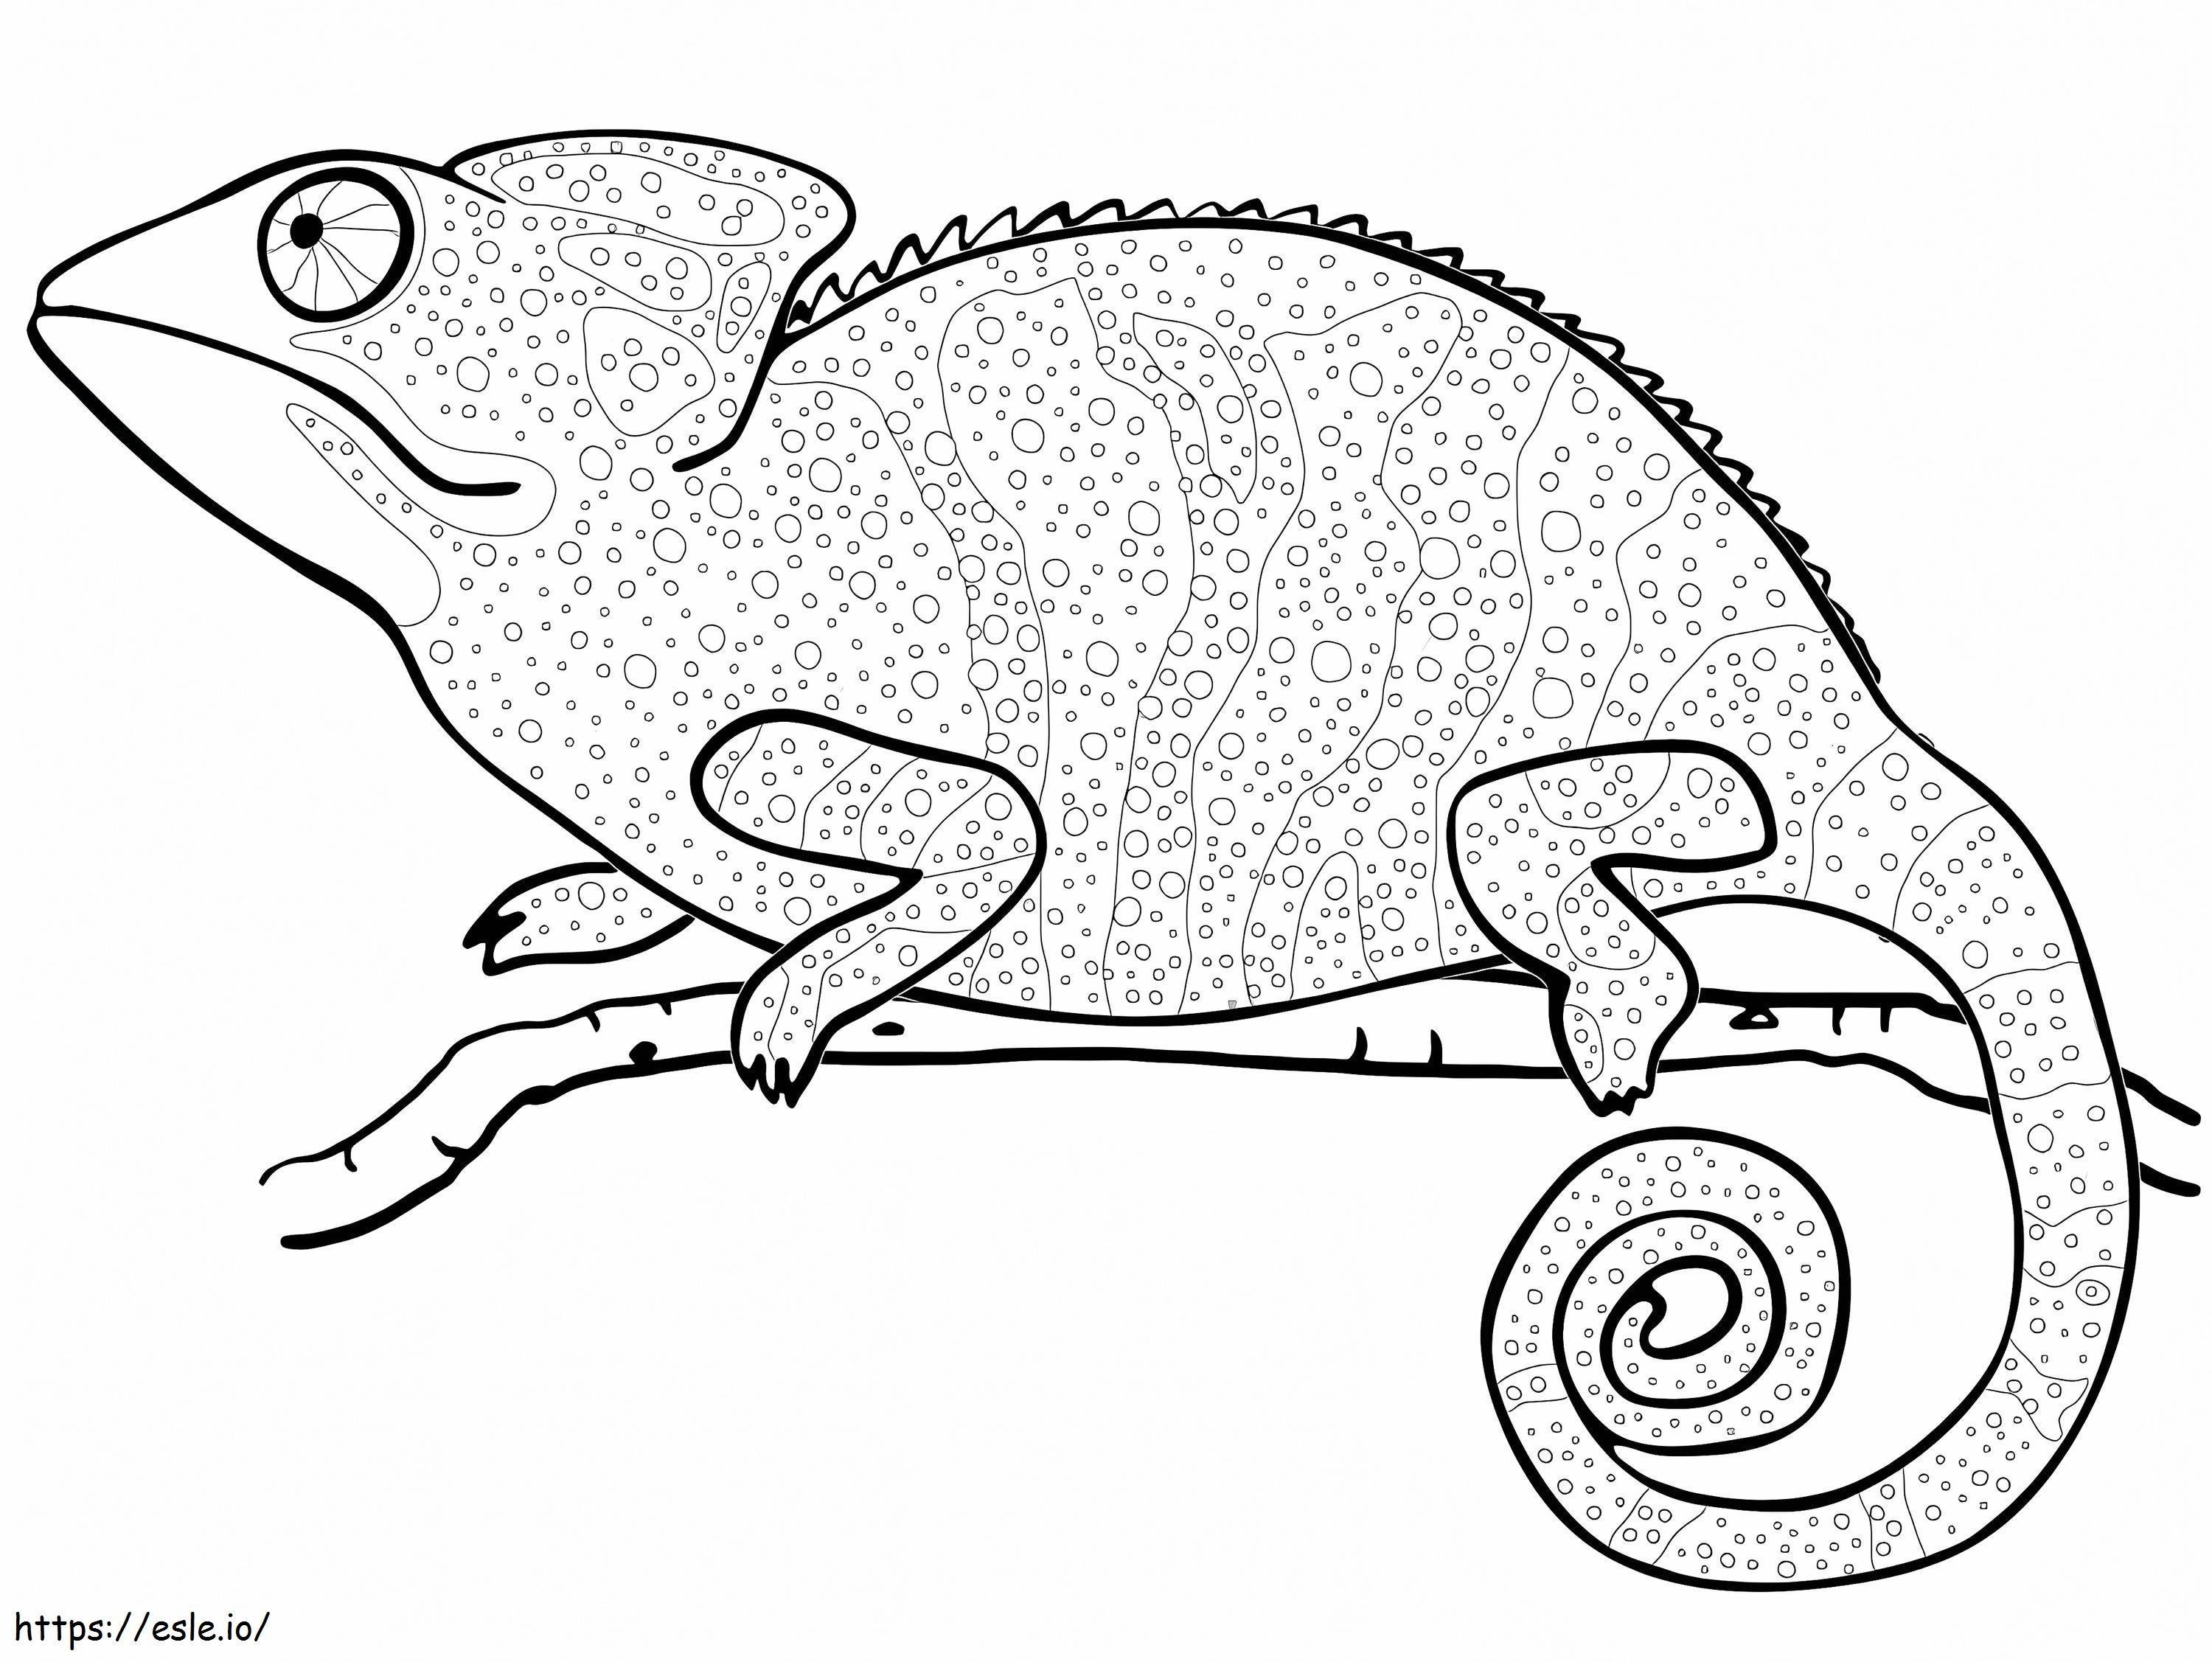 A Chameleon coloring page